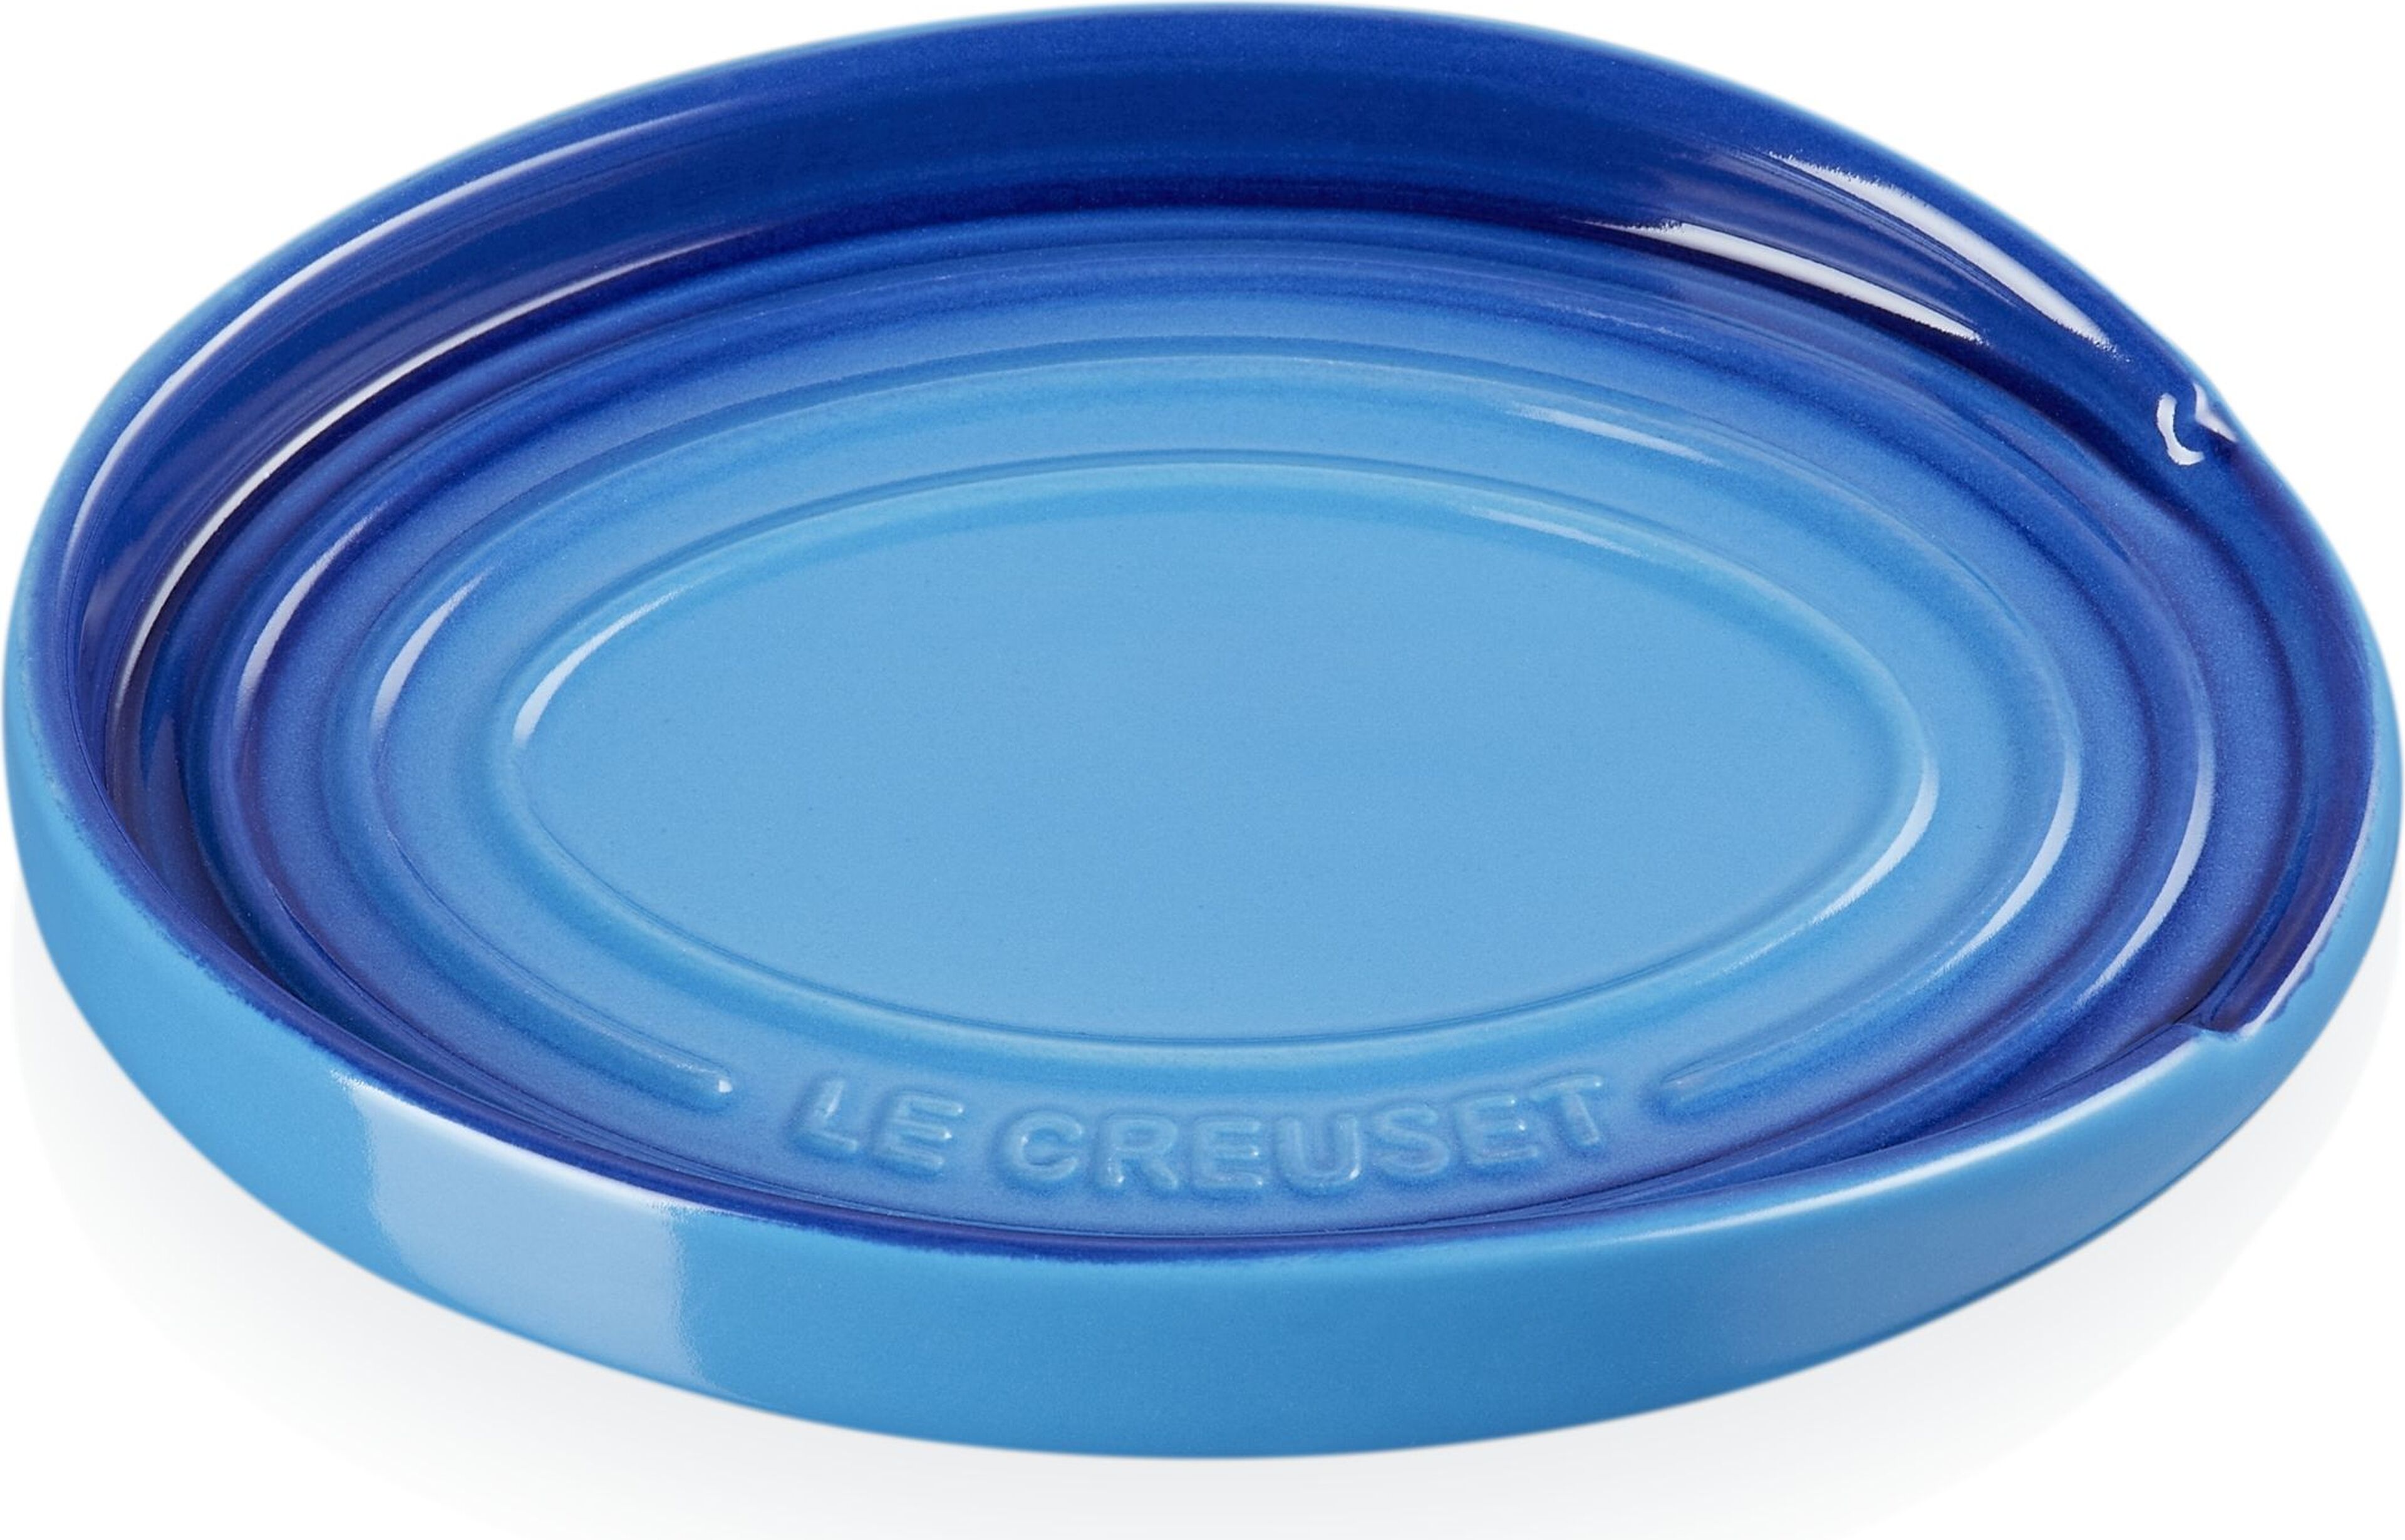 Le Creuset Lusikaalus